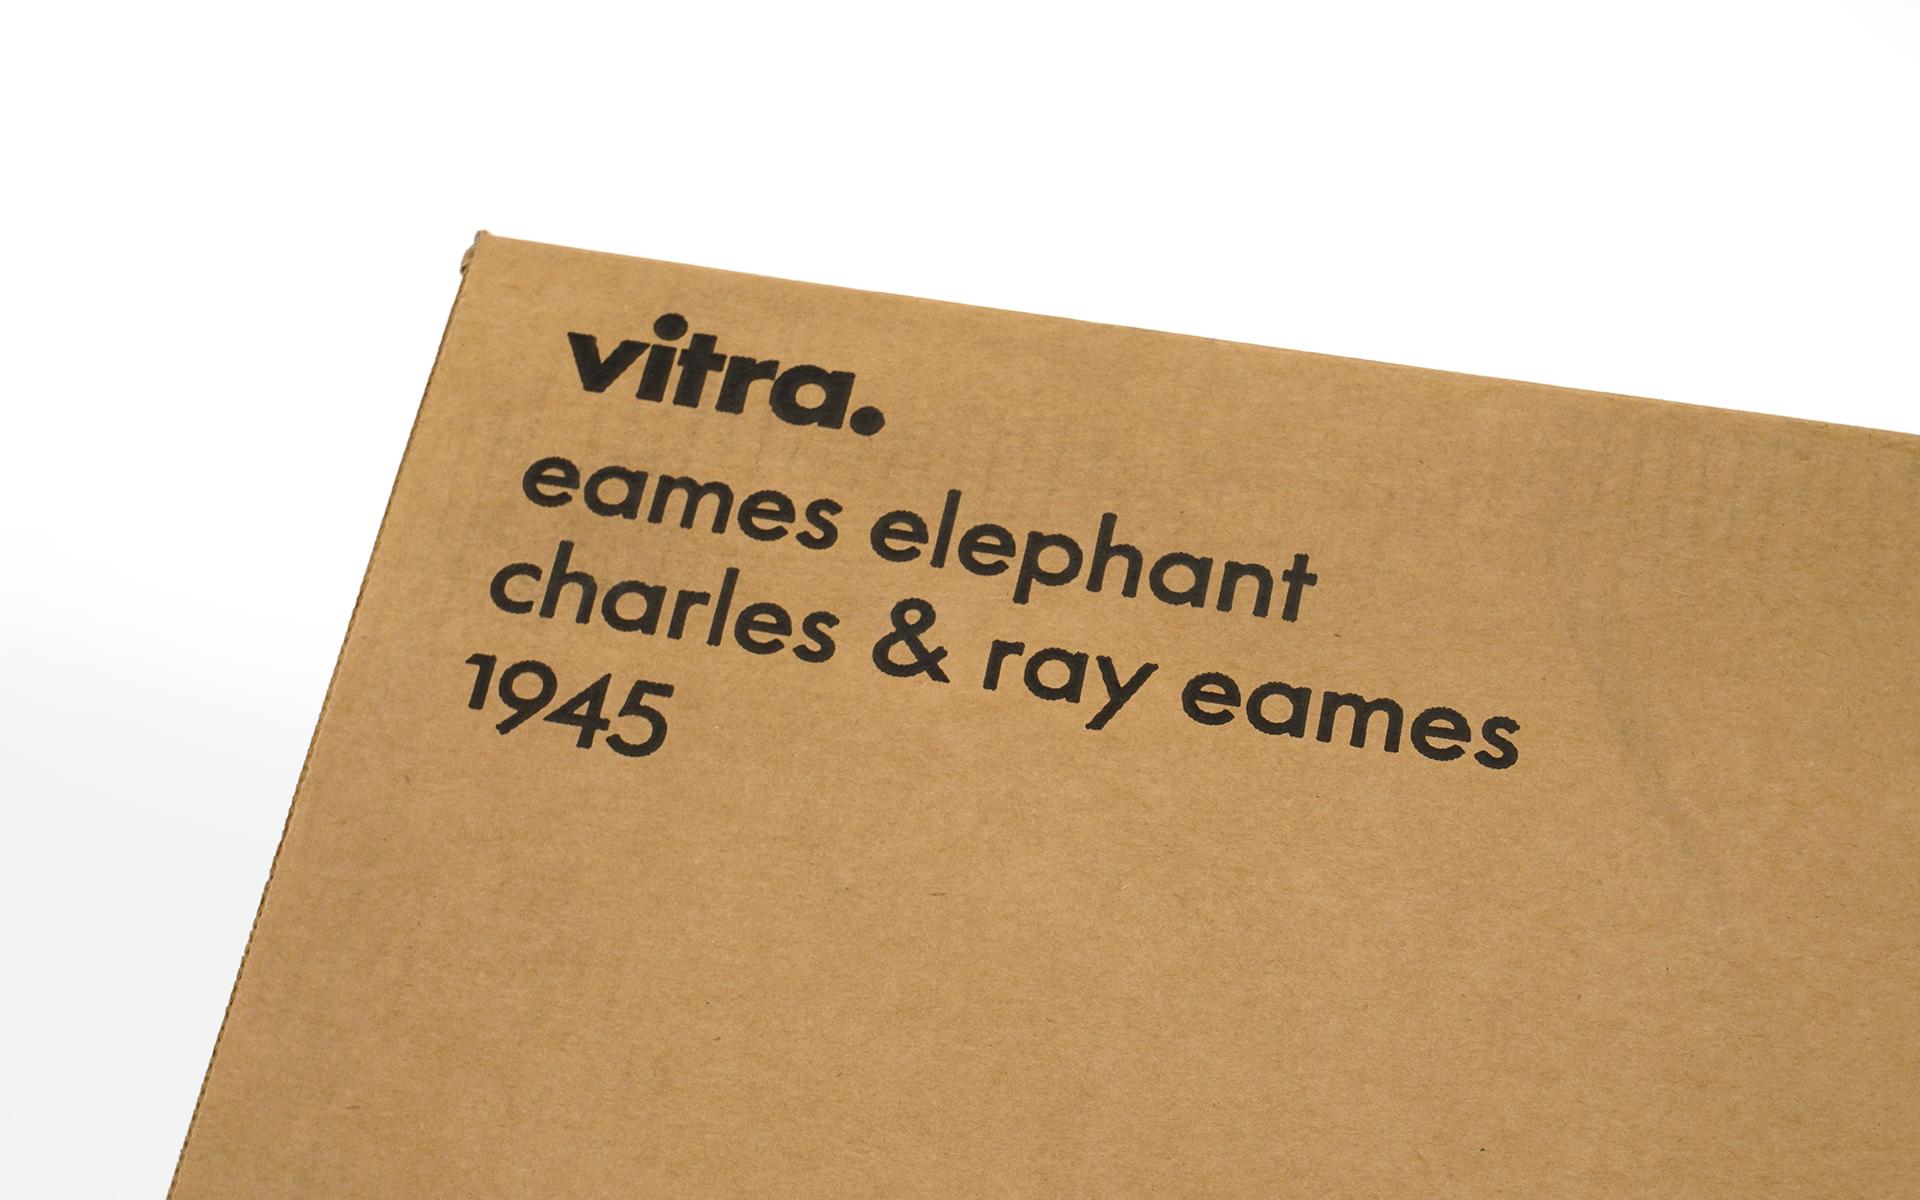 Plywood Elephant by Charles and Ray Eames, New, Only Opened for Photos 4